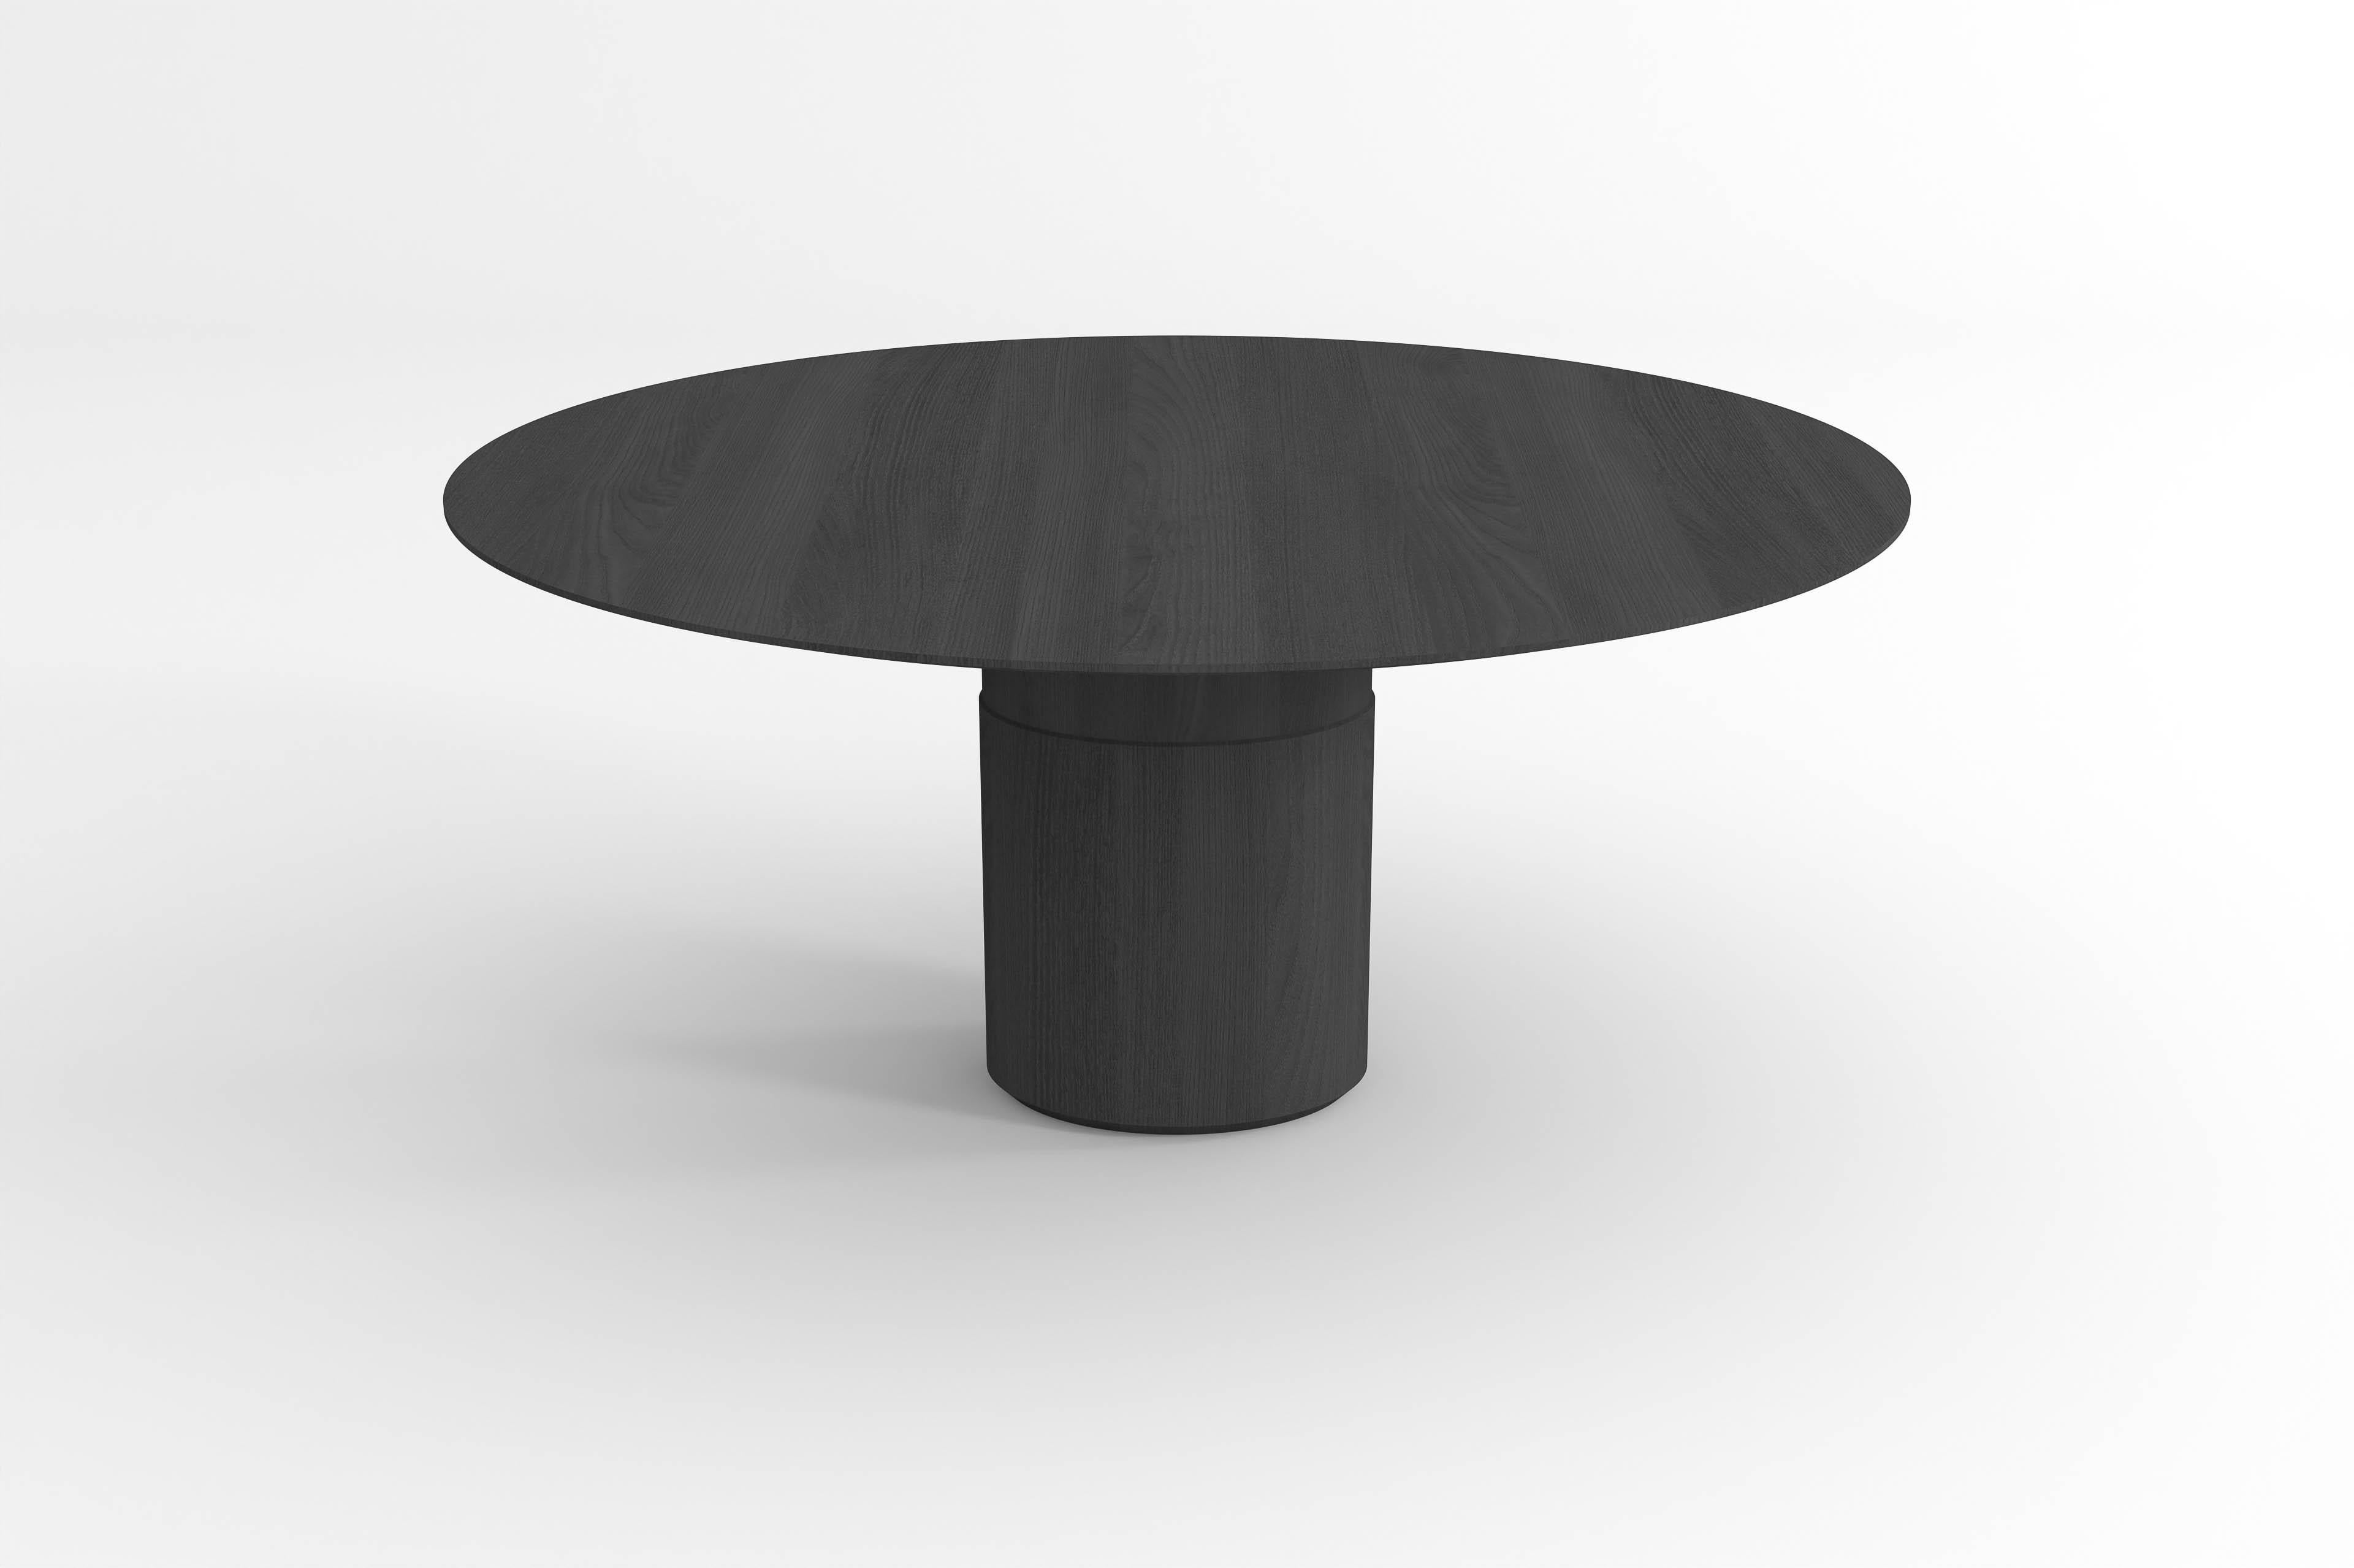 The undisc table makes us look at the central leg in a different way. Something is going on but in a modest way. Simple yet refined, it offers a central dining table that dissolves in the room it's in and allows for other elements to star.
The